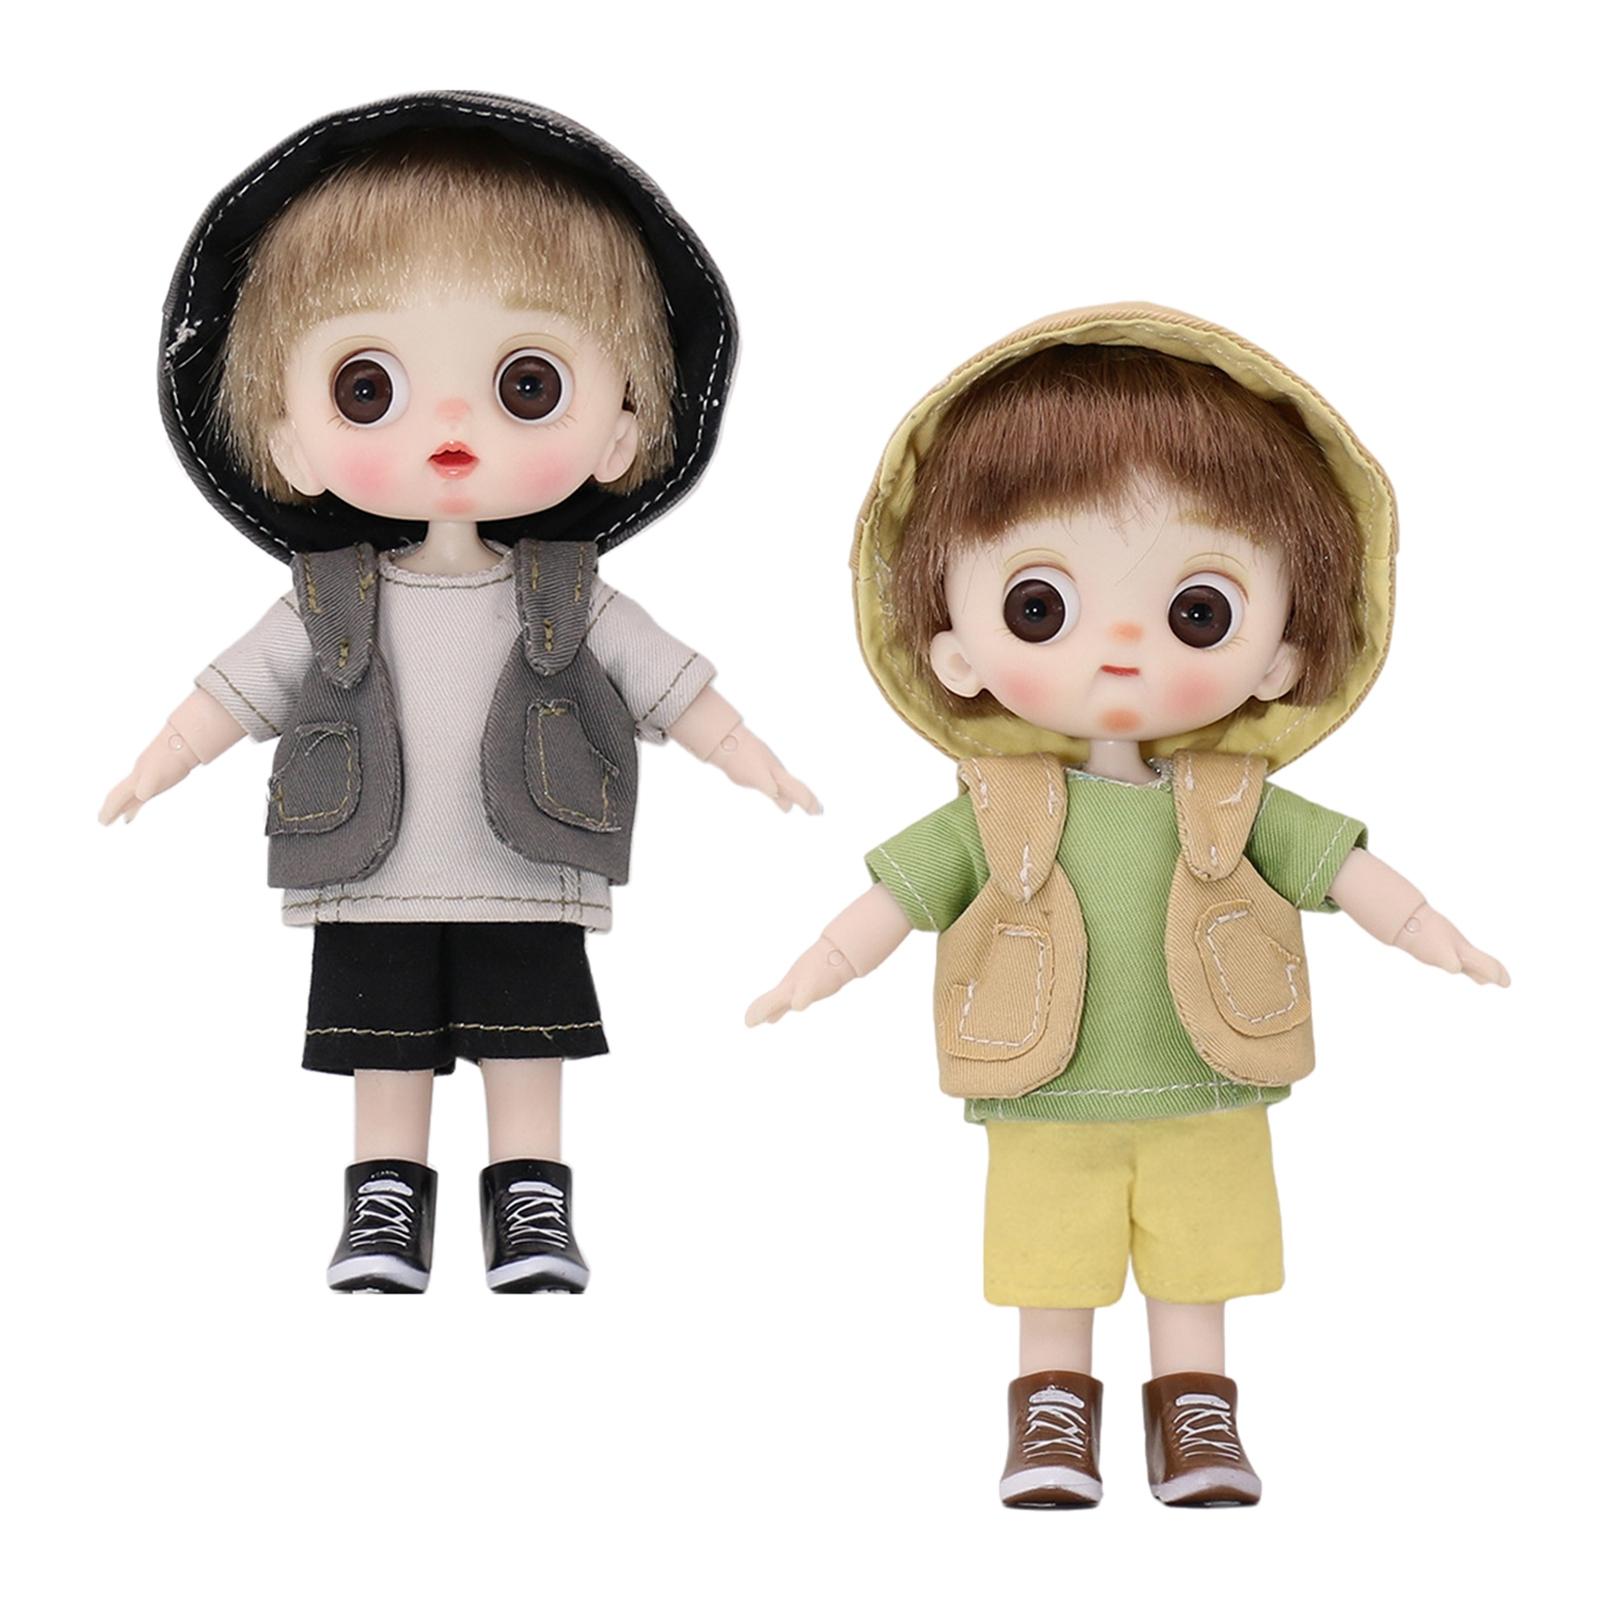 Flexible Movement BJD Doll, Boy 5.5 in DIY Toys Kids Pretend 12 Movable Joints Ball Jointed Doll for Gift Parties Birthday